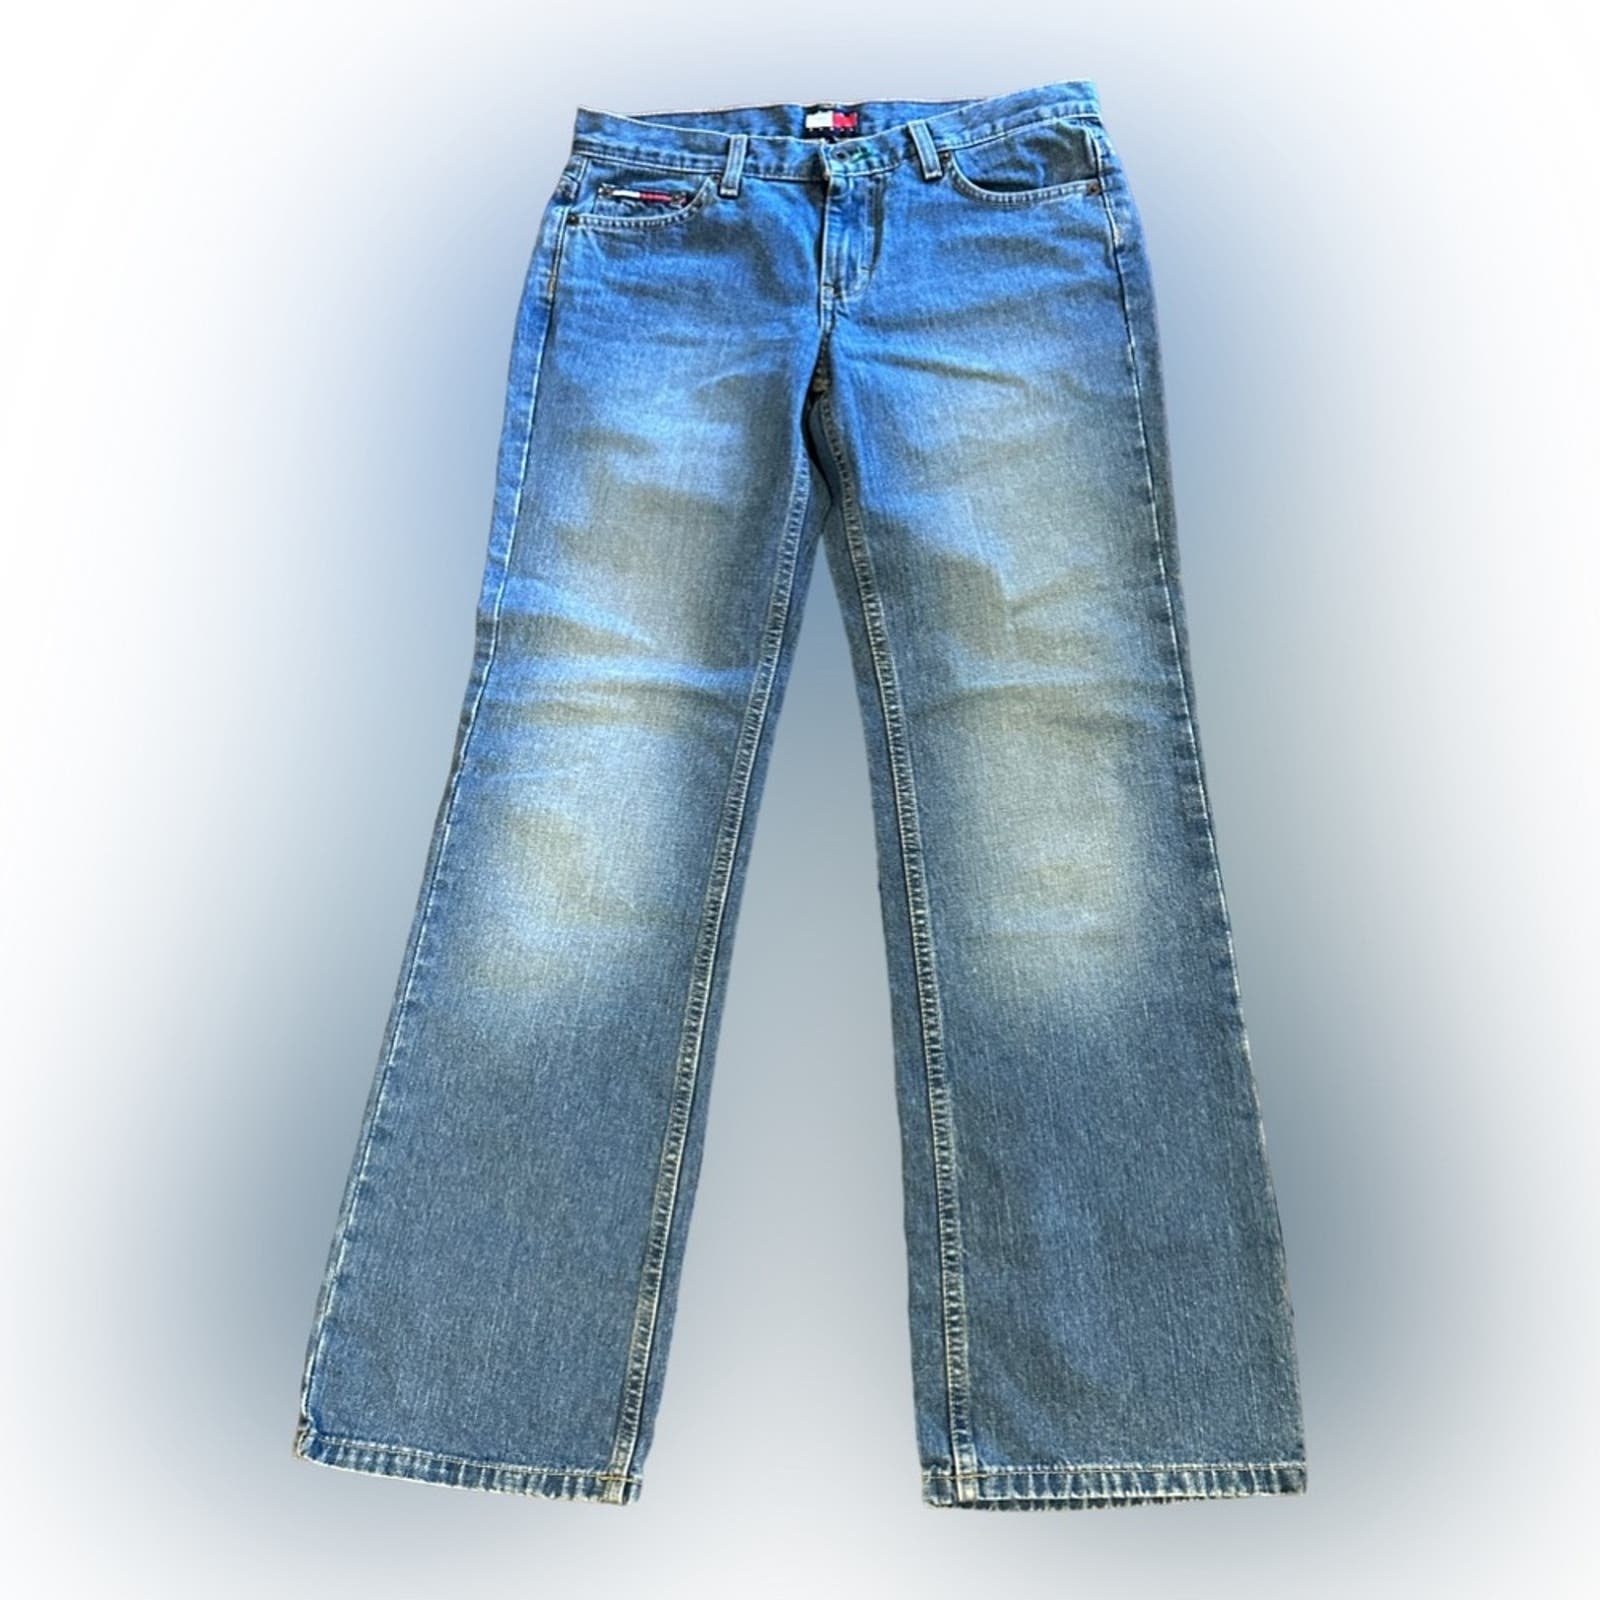 Personality Tommy Hilfiger Classic Straight Jeans 30 x 